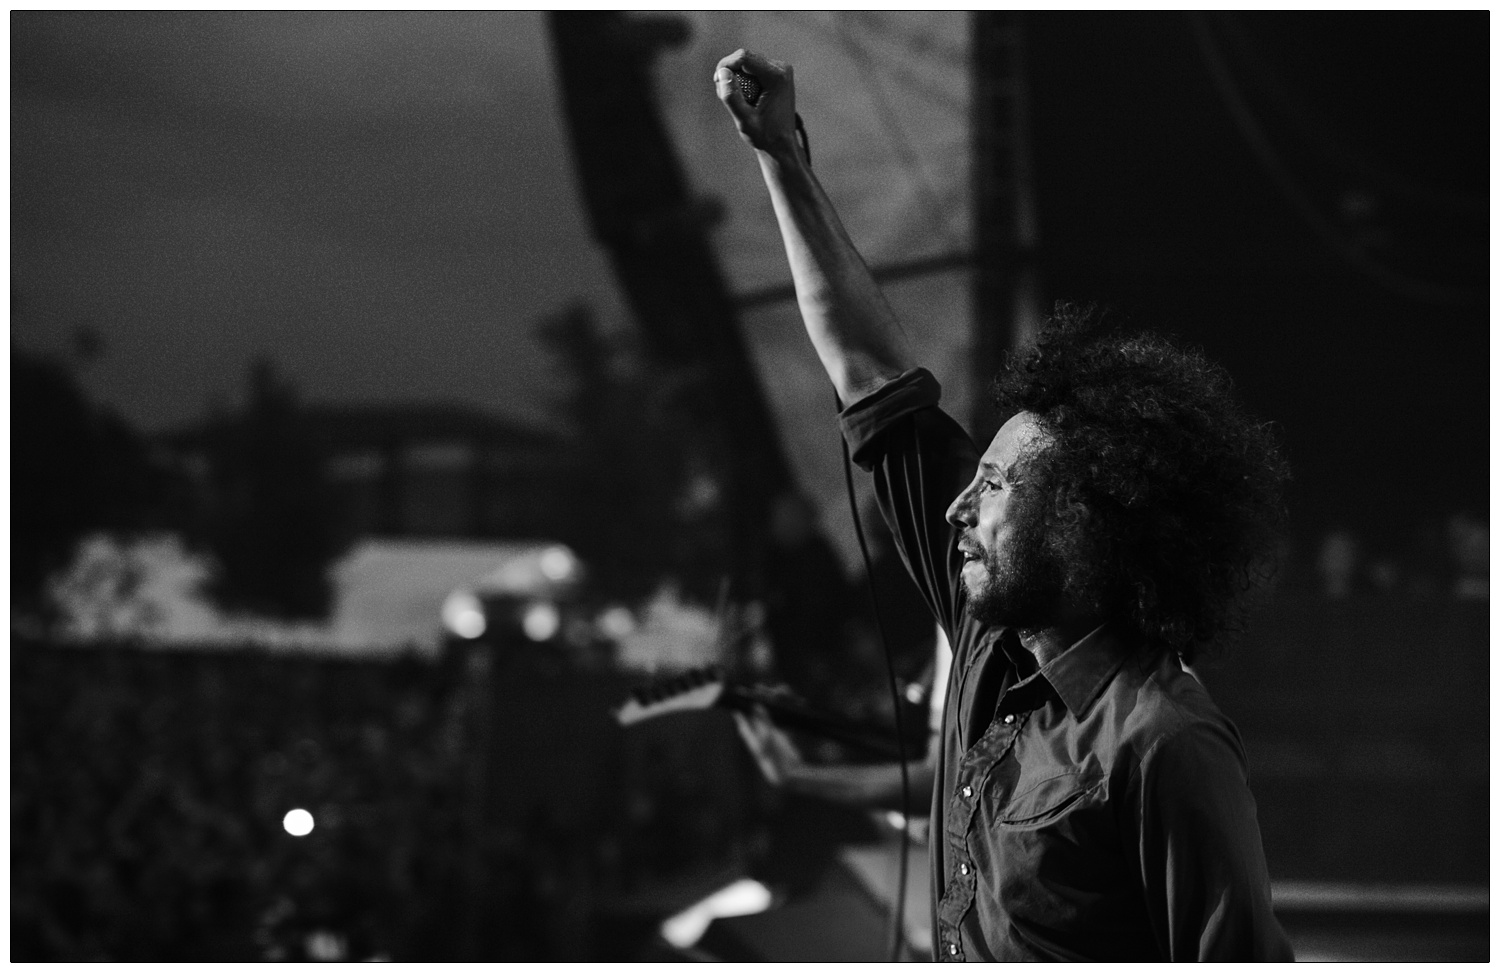 Zack de la Rocha on stage with arm raised at Rage Against the Machine at the Finsbury Park Christmas number one concert